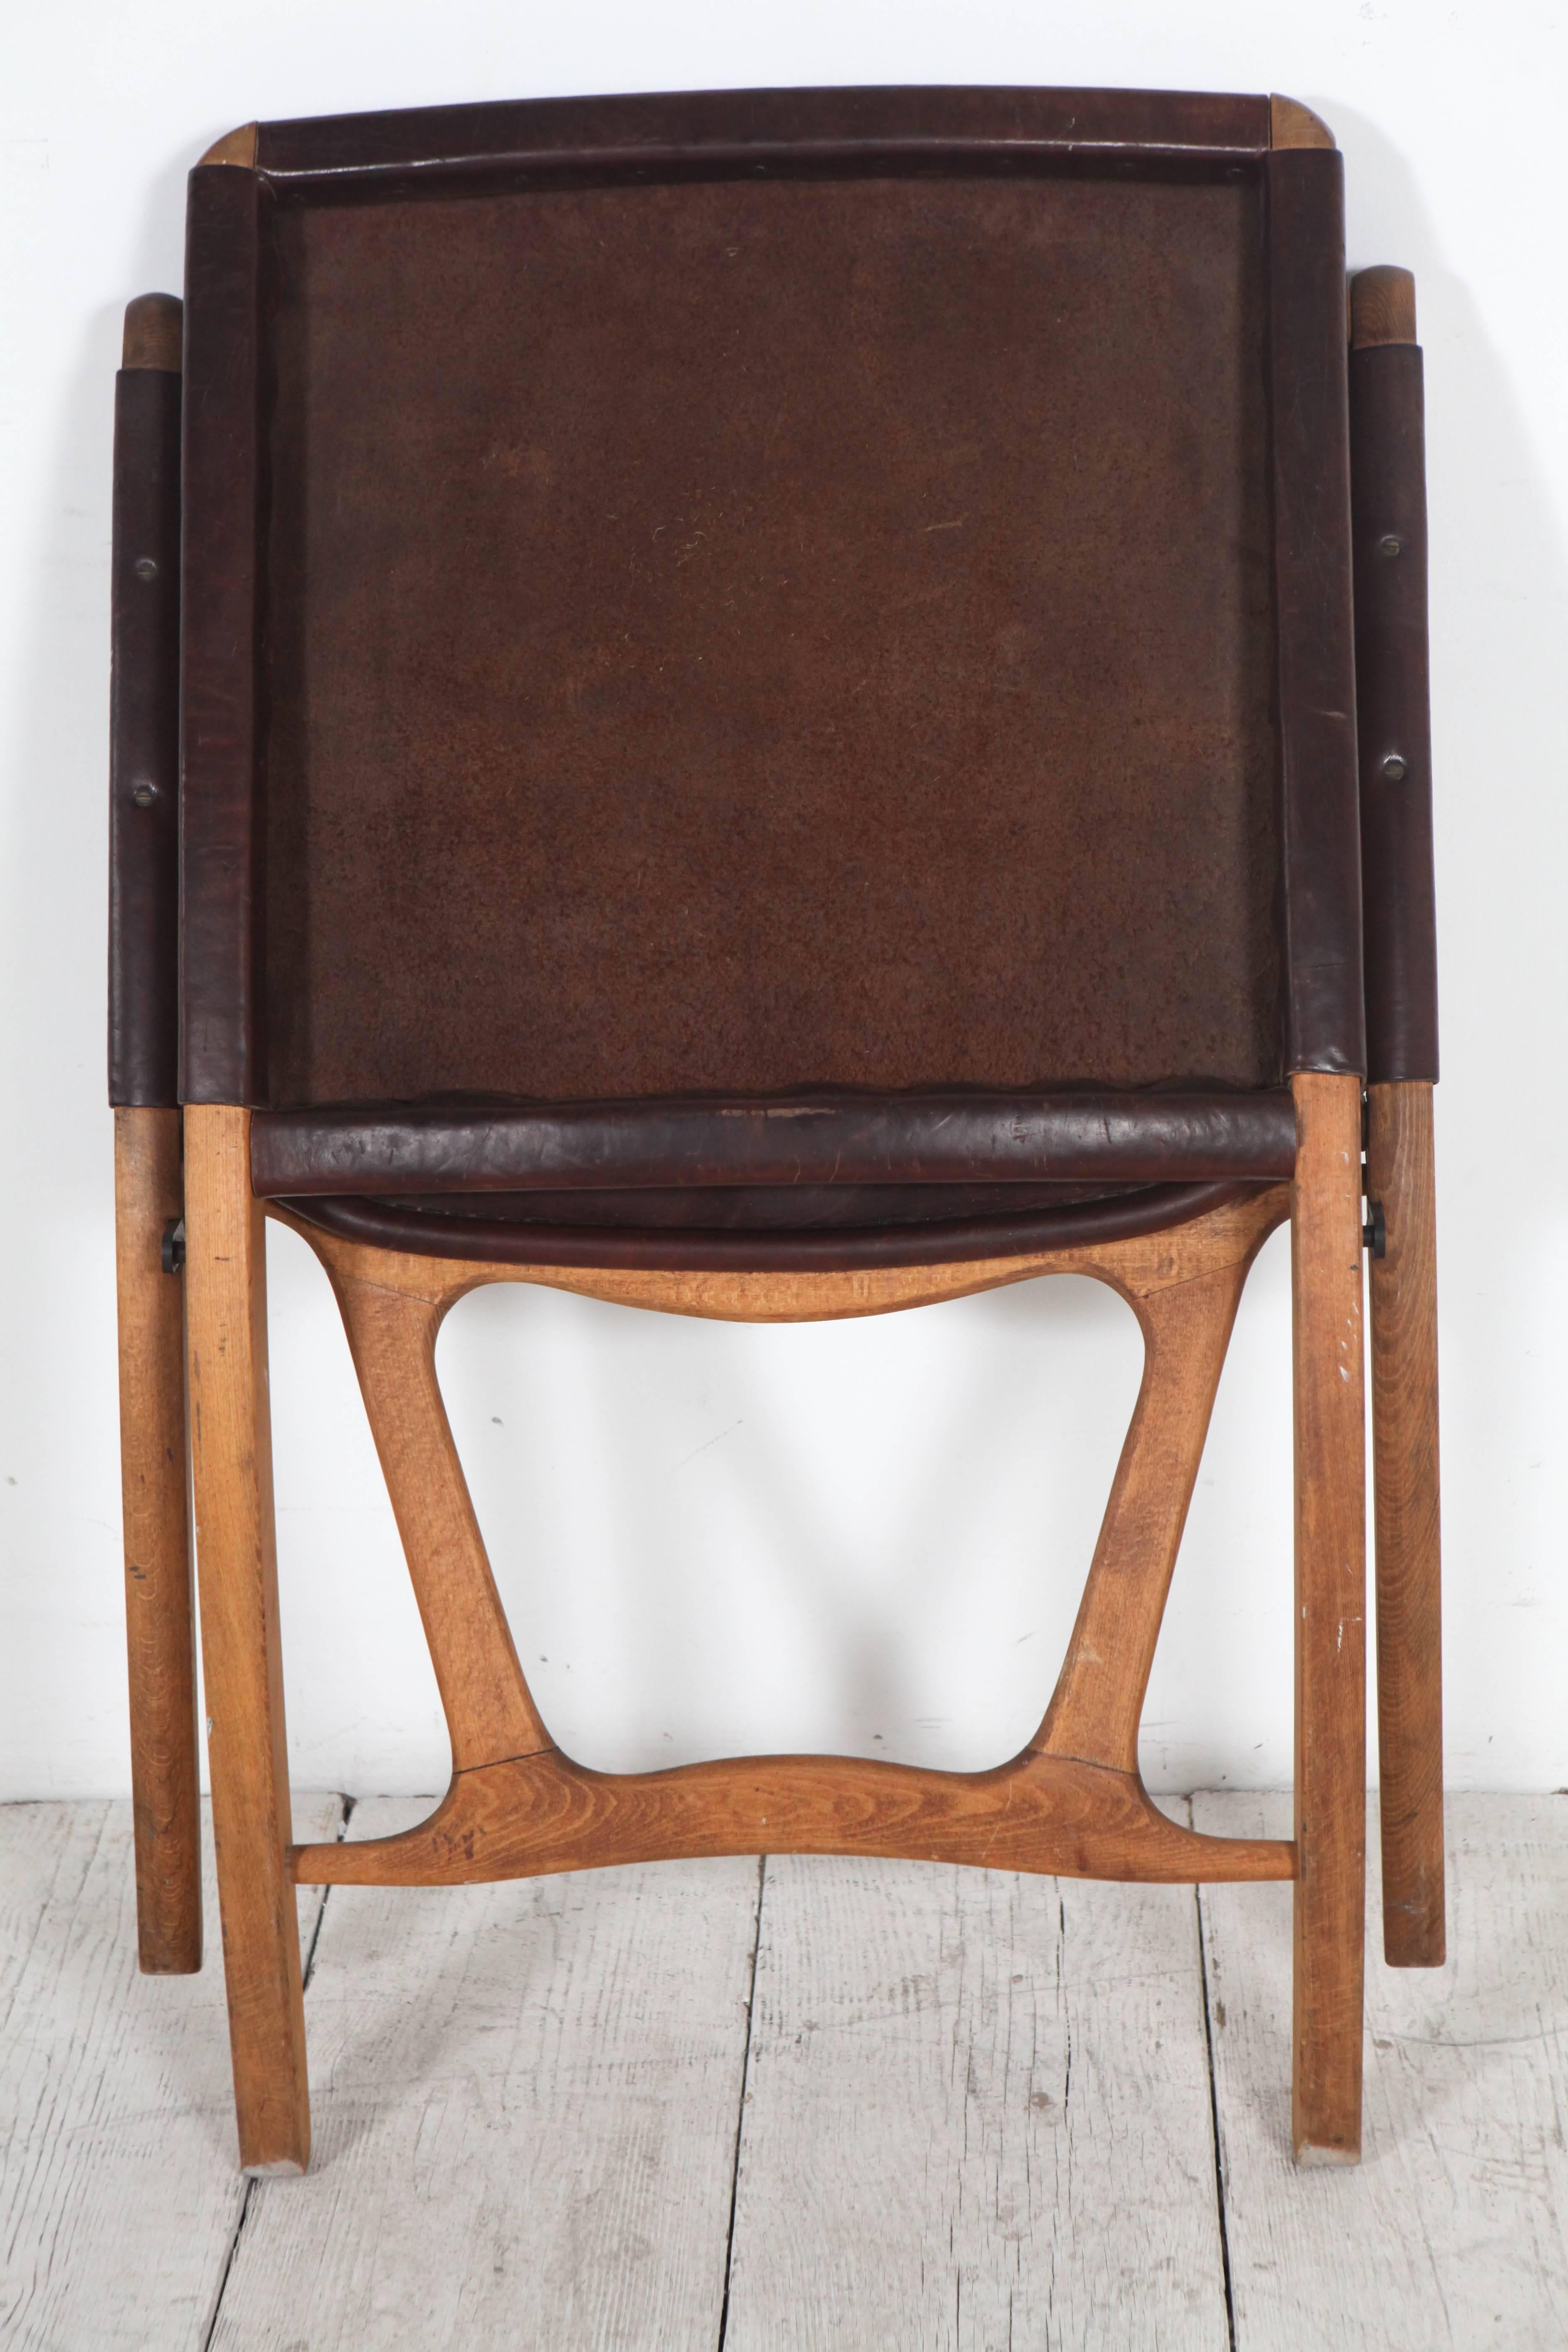 Mid-20th Century Italian Leather and Wood Folding Chair